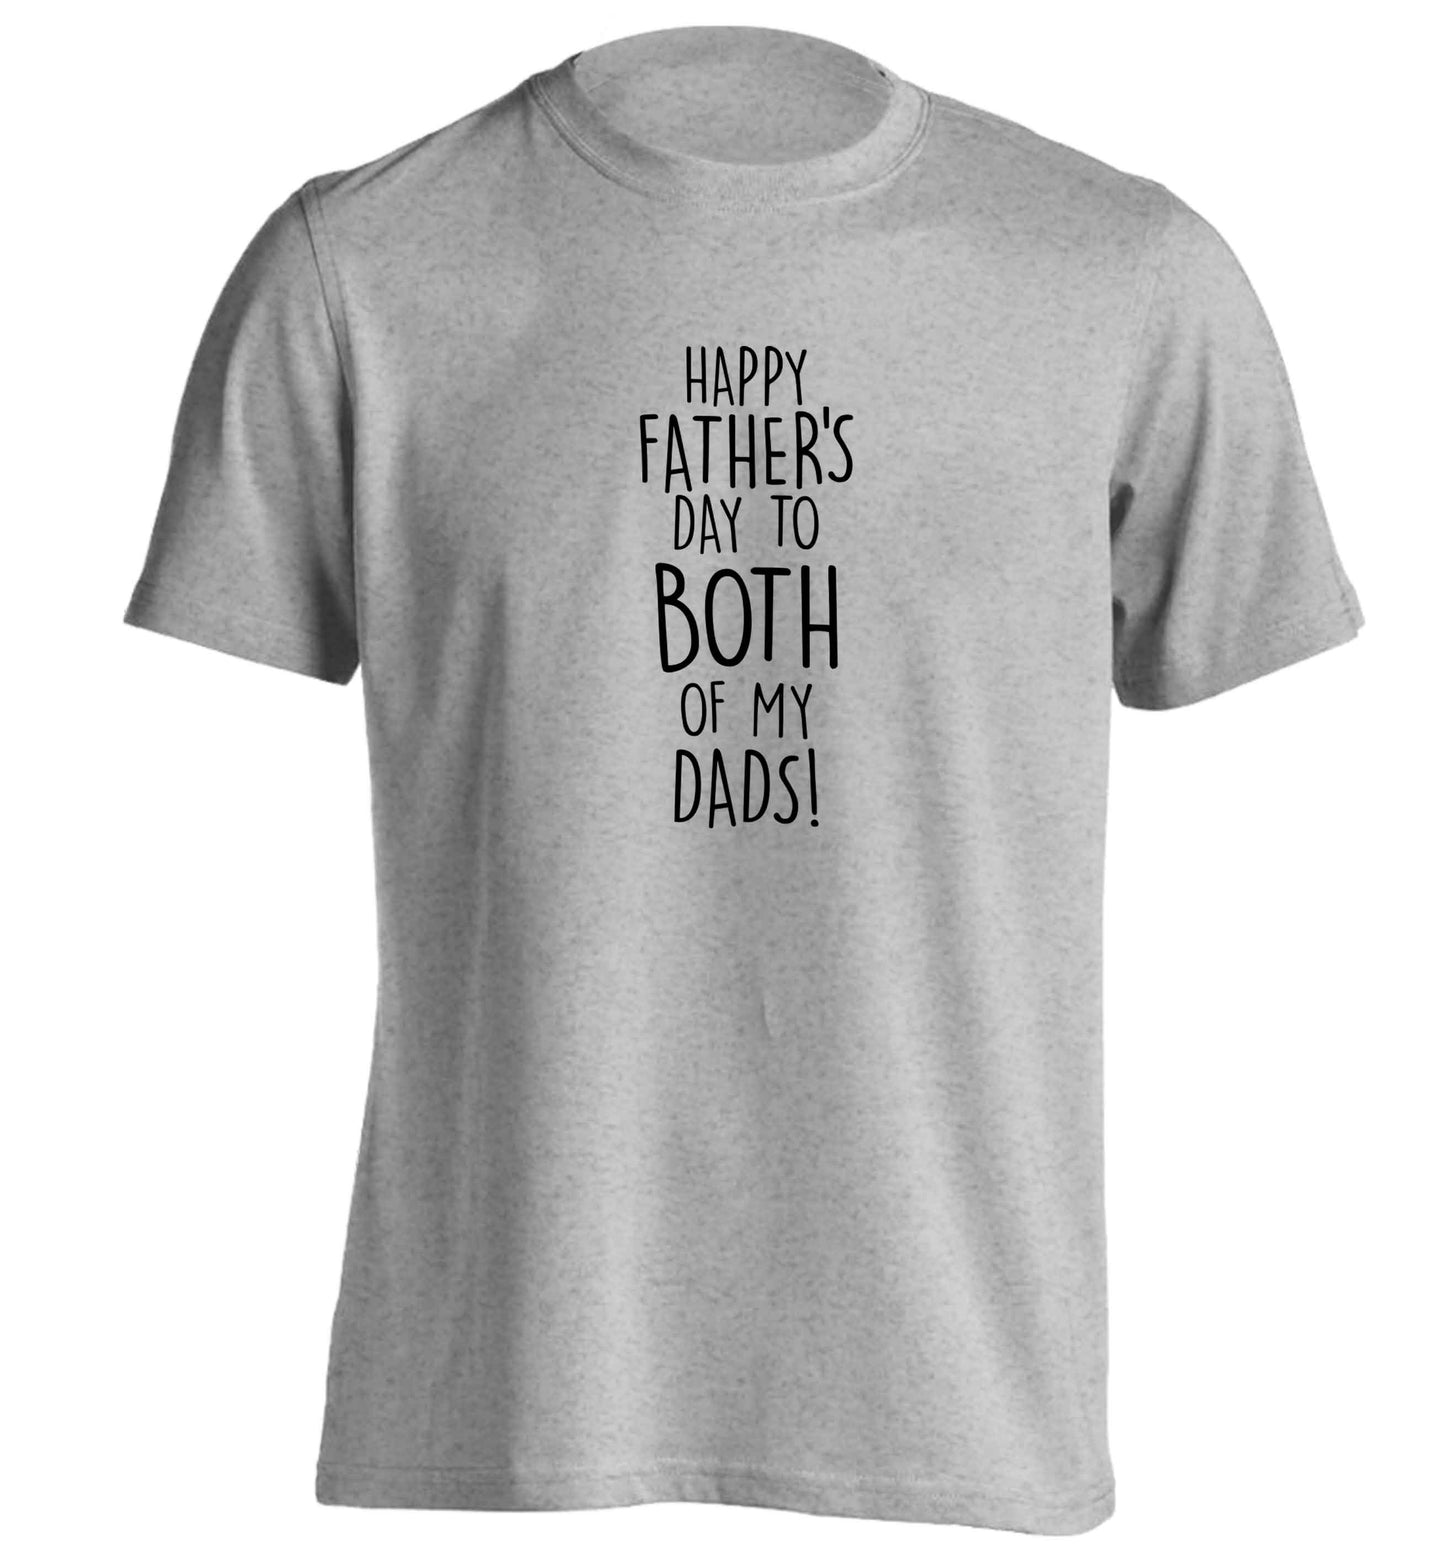 Happy Father's day to both of my dads adults unisex grey Tshirt 2XL